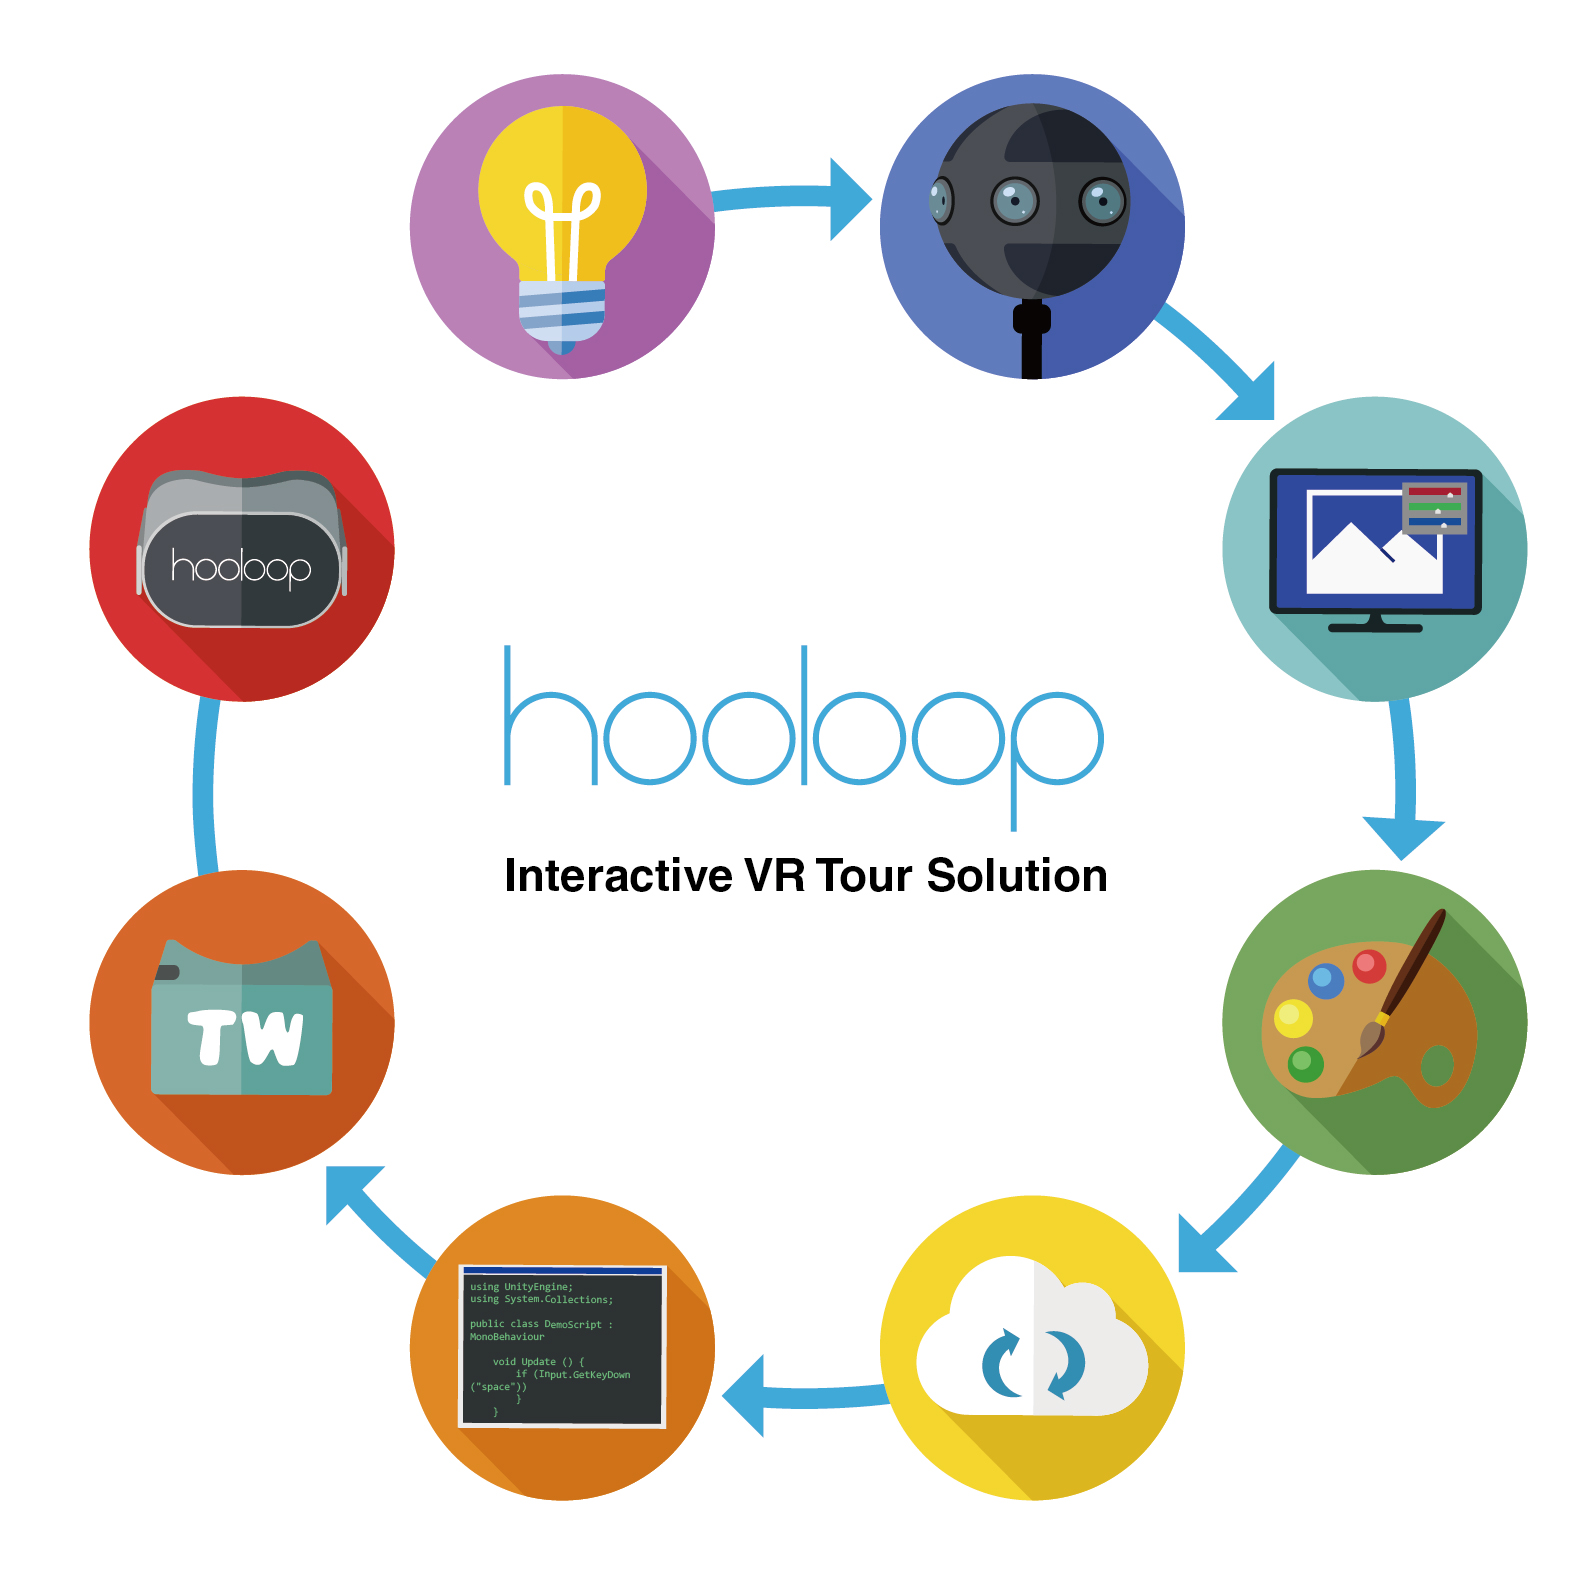 Hooloop Interactive VR Tour Solution